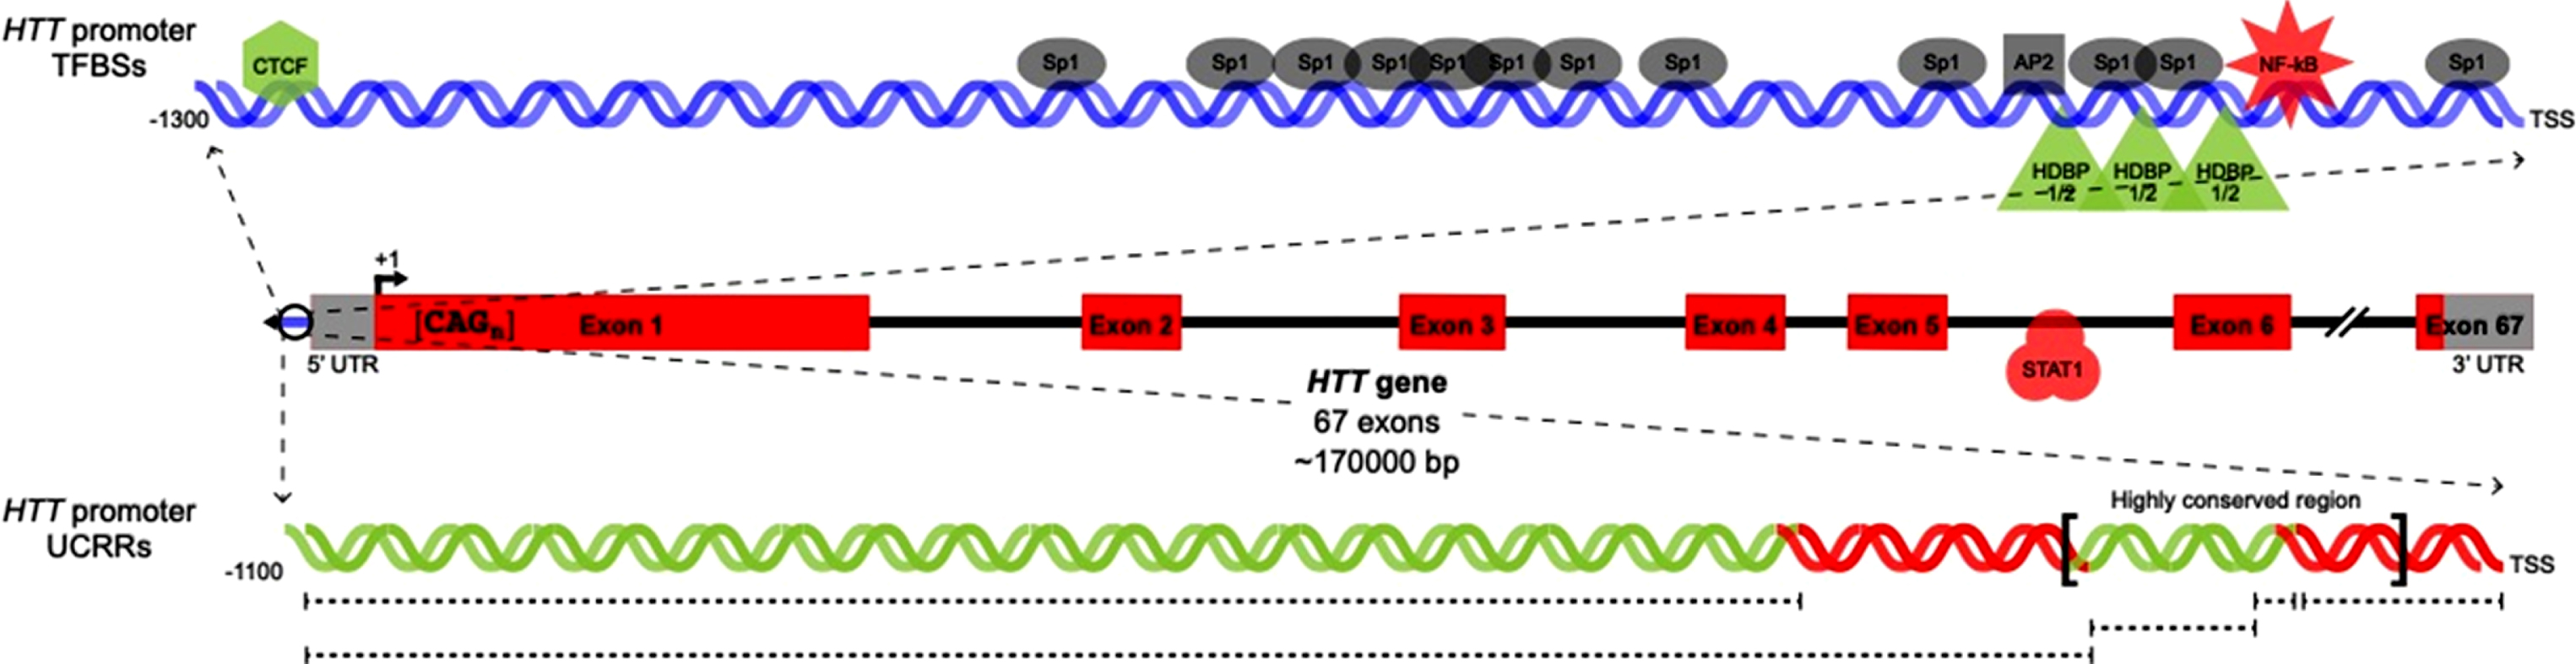 Previously characterized HTT transcription factor binding sites and regulatory regions. Locations of TFBSs in the HTT proximal promoter (upper) and gene body (center) are shown. In parallel, uncharacterized regulatory regions in the HTT proximal promoter are indicated. TFs/UCRRs shown to upregulate (green) or downregulate (red) HTT transcription are pictured in addition to TFs with unknown effects on HTT transcription (grey).